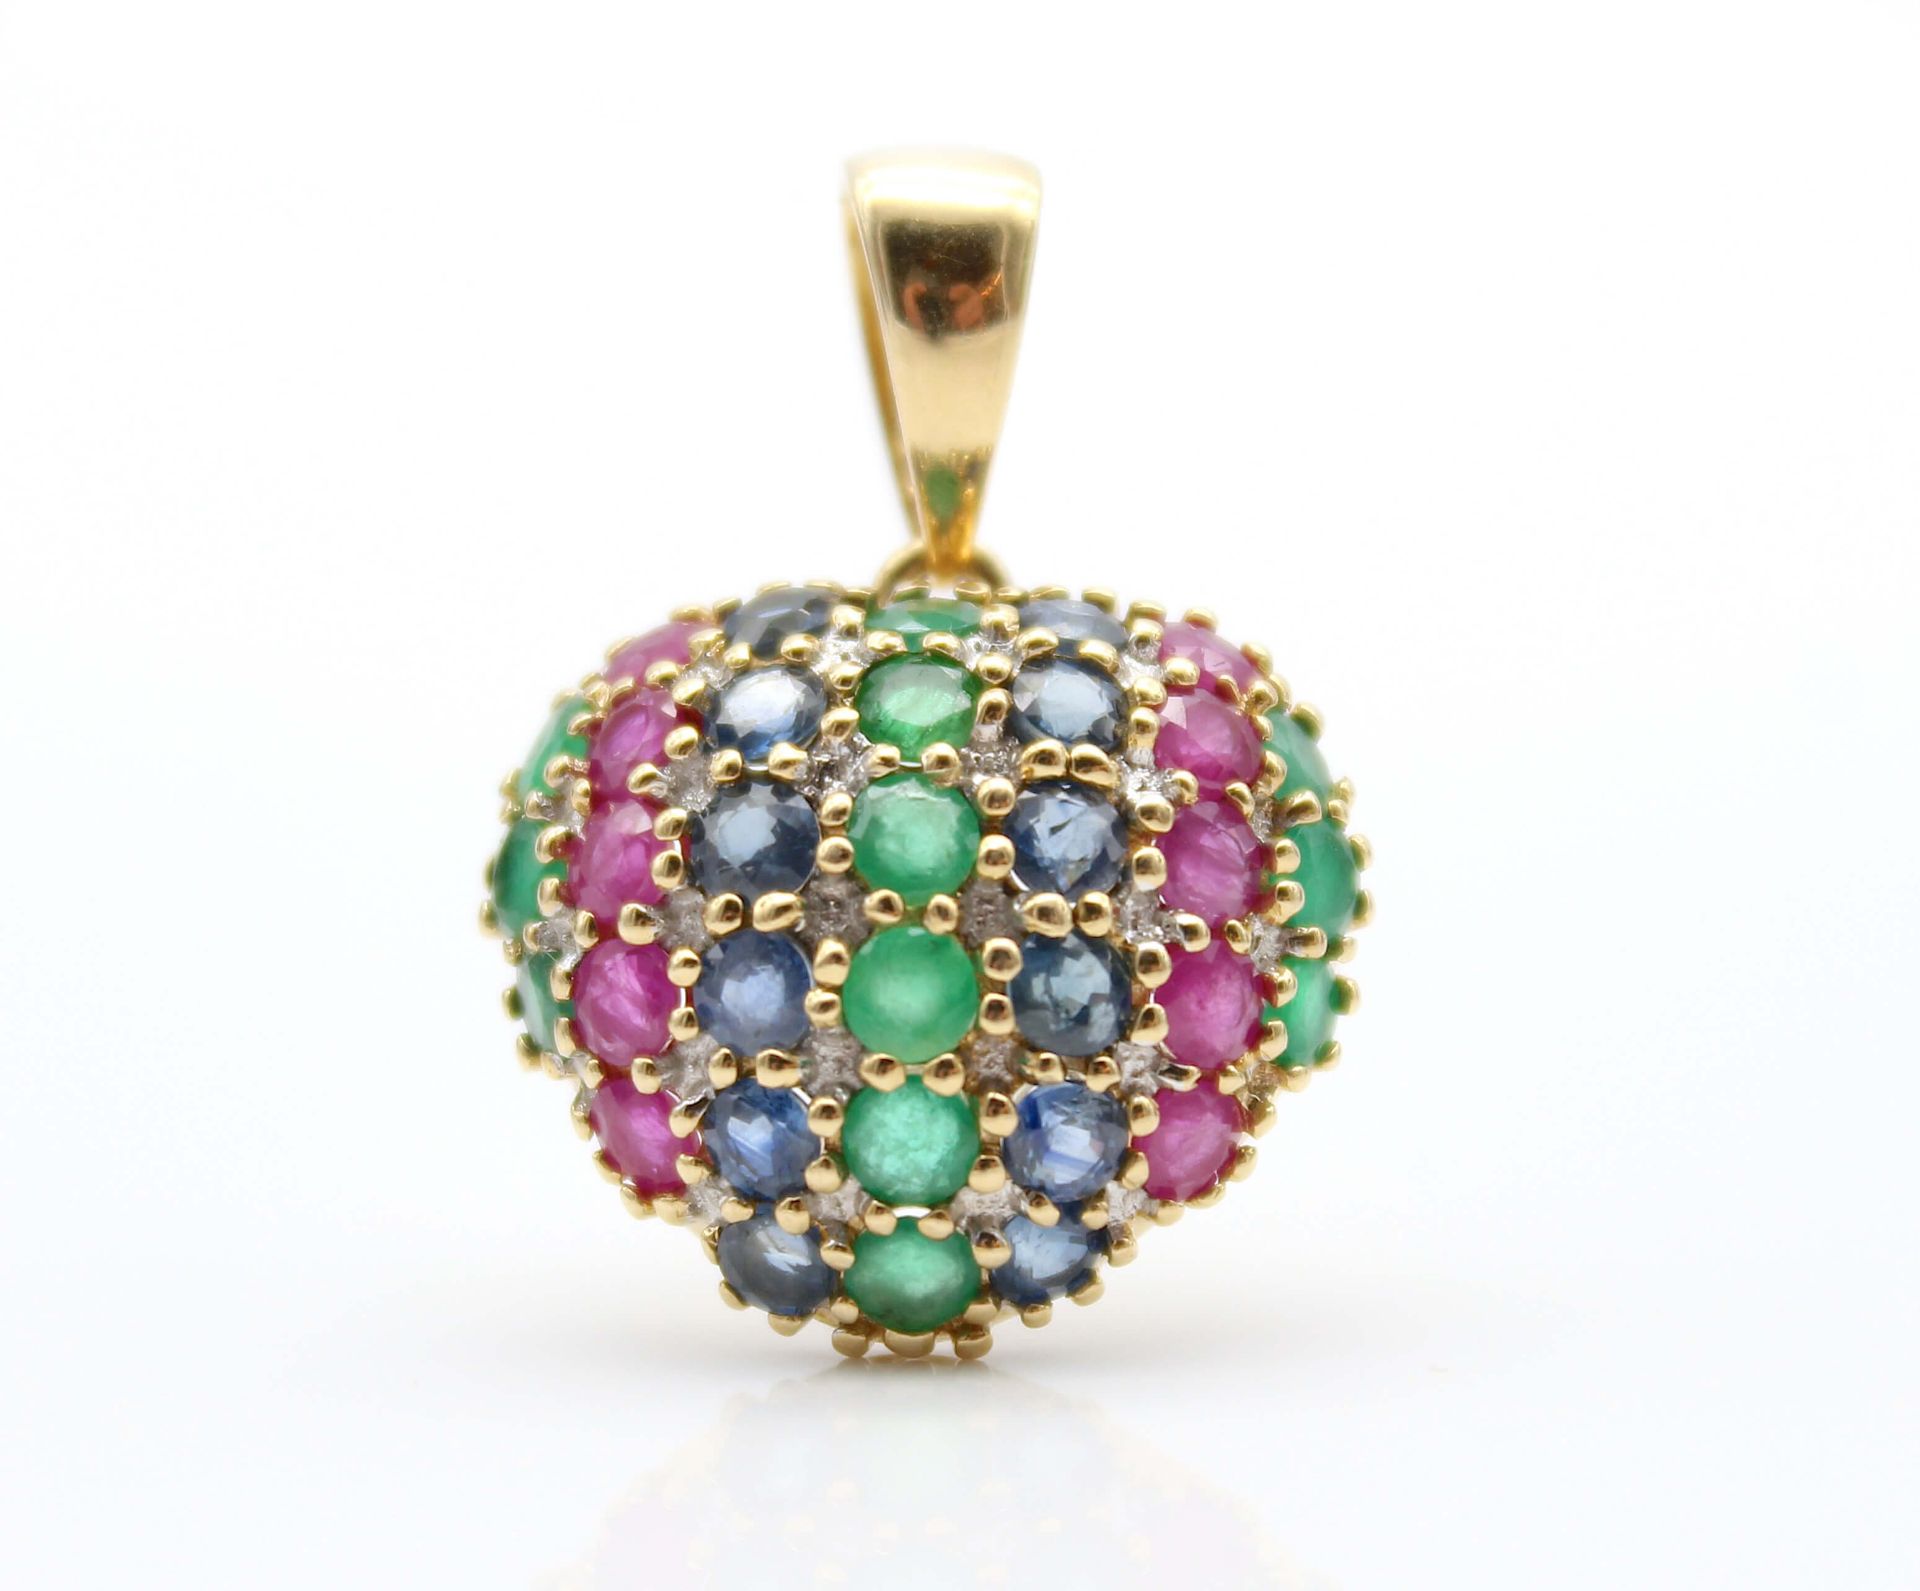 Heart pendant with sapphires, emeralds and rubies - Image 2 of 3